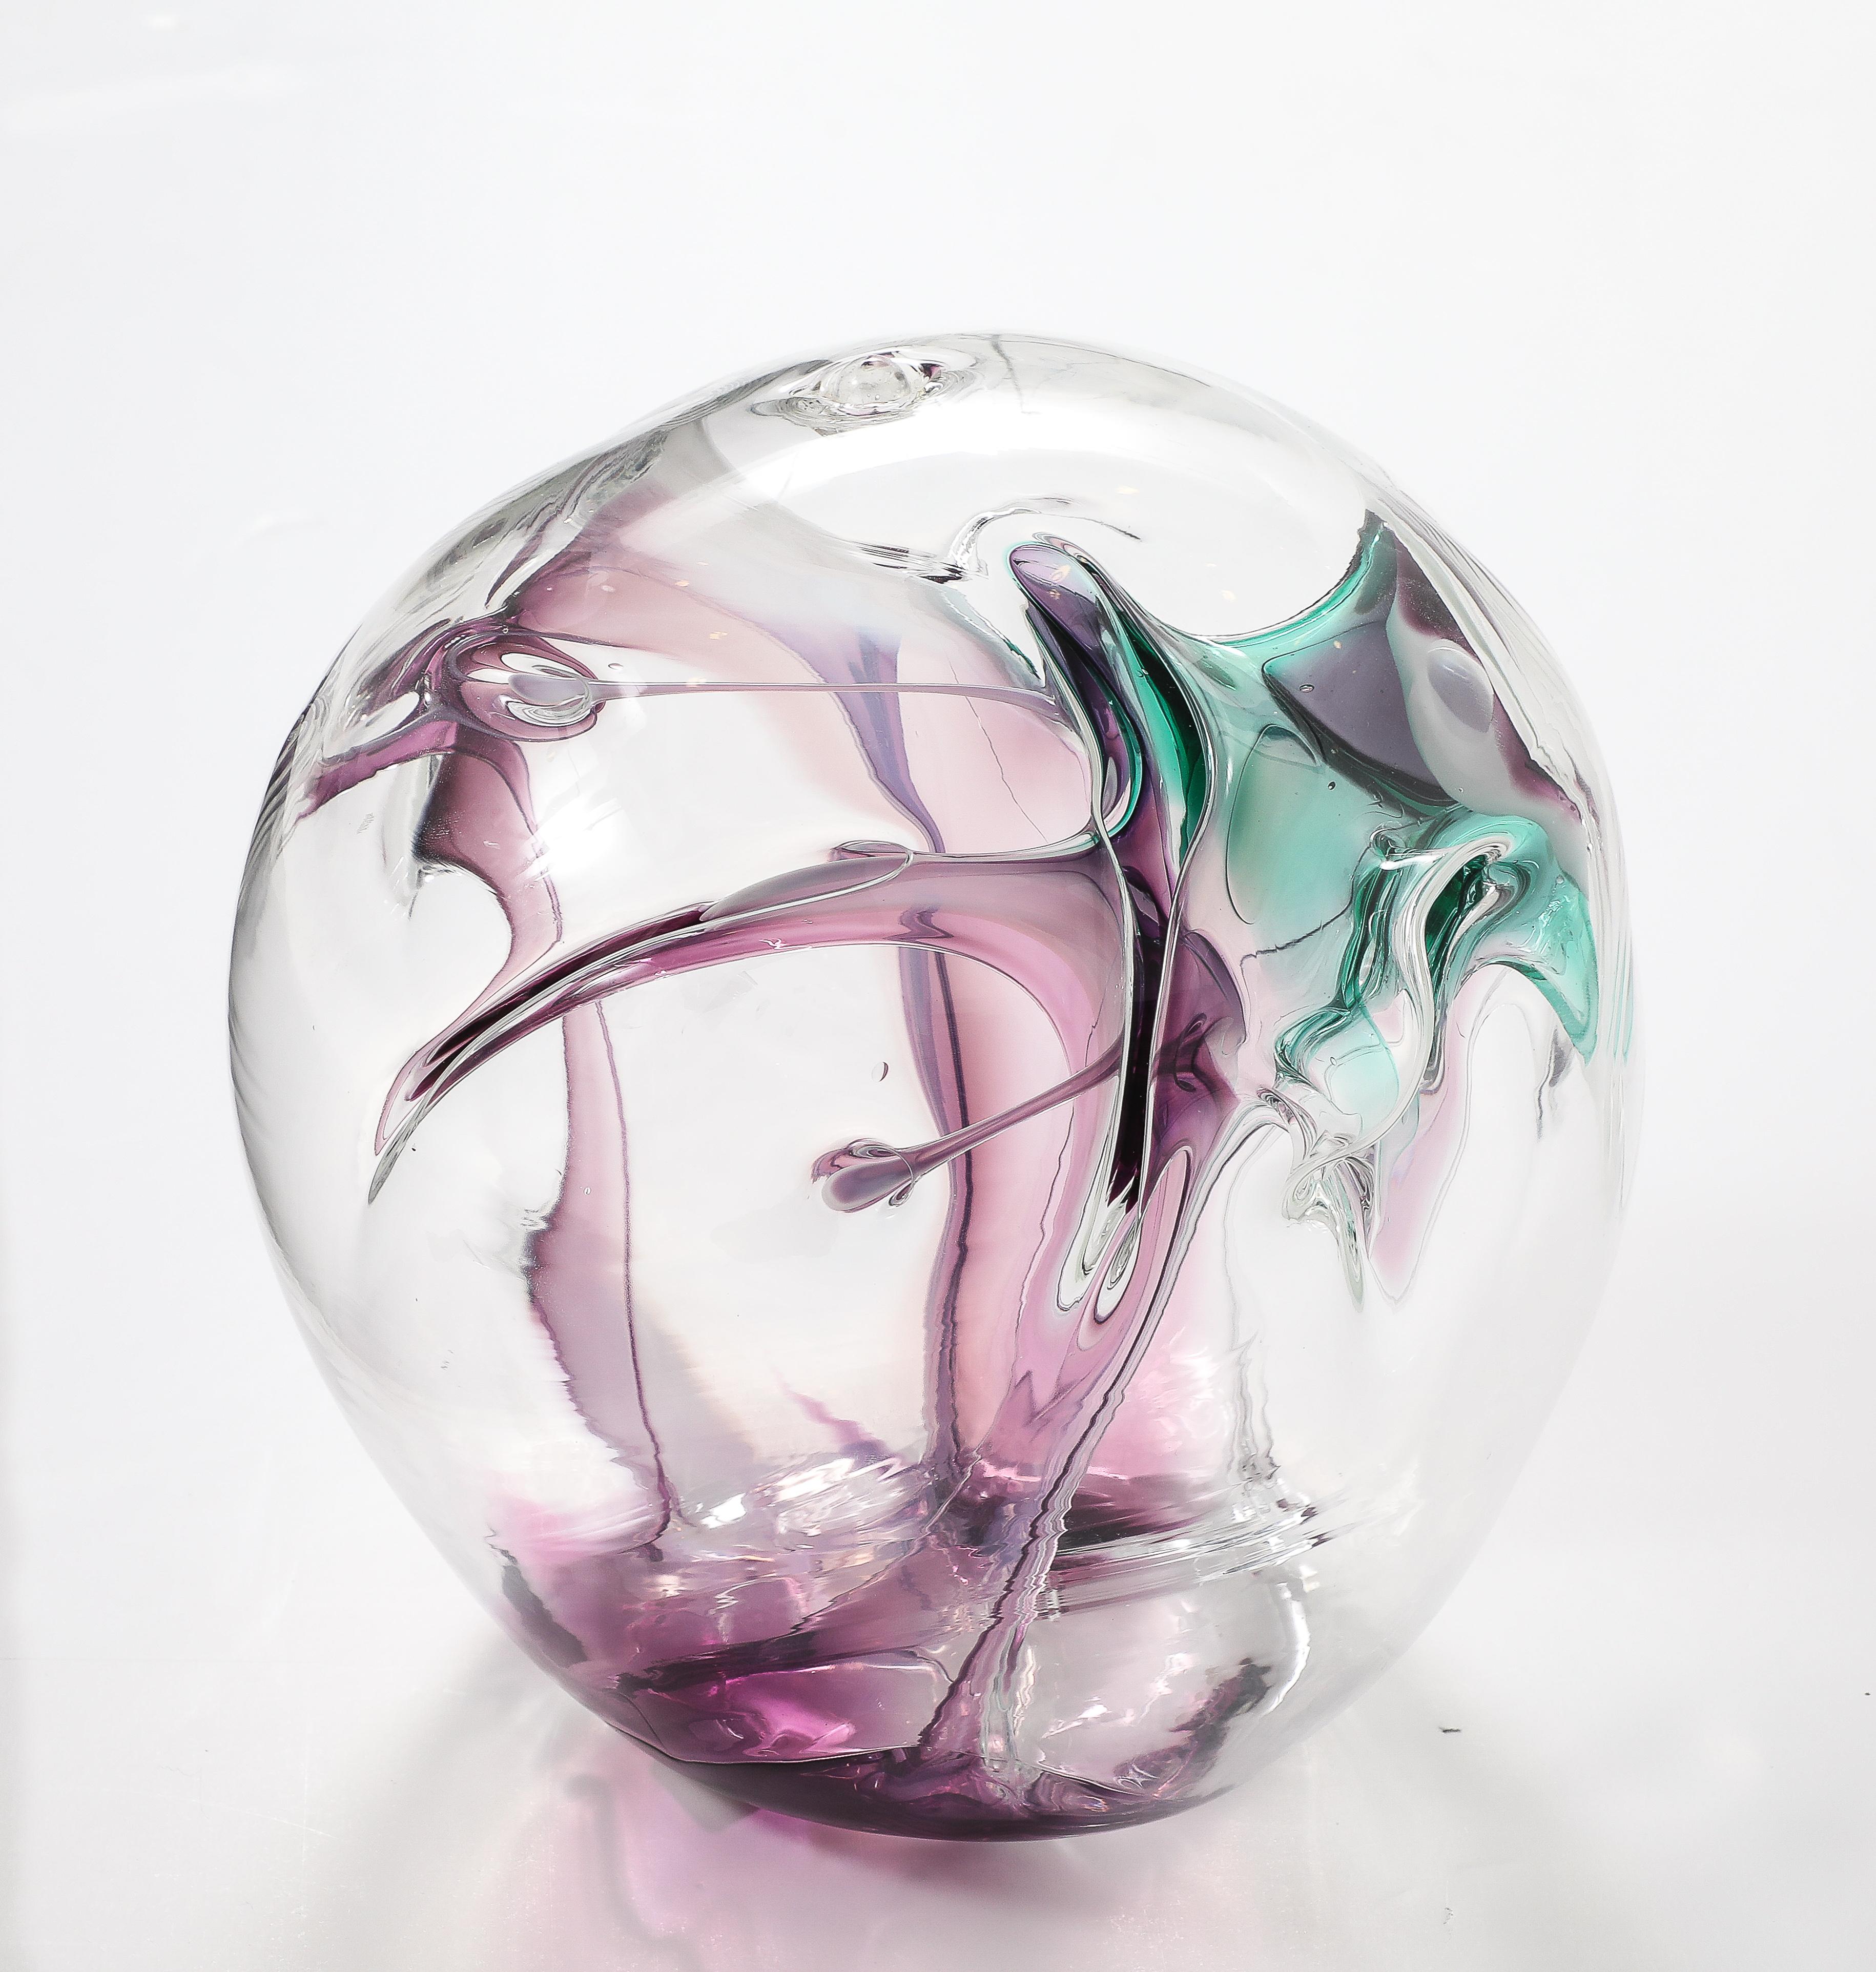 Wonderful hand blown glass Orb sculpture signed and dated by PETER BRAMHALL 1998.
The Orb has internal glass threads in beautiful shades of Magenta and Green.
Please see All our other Bramhall's listed to create a stunning collection.